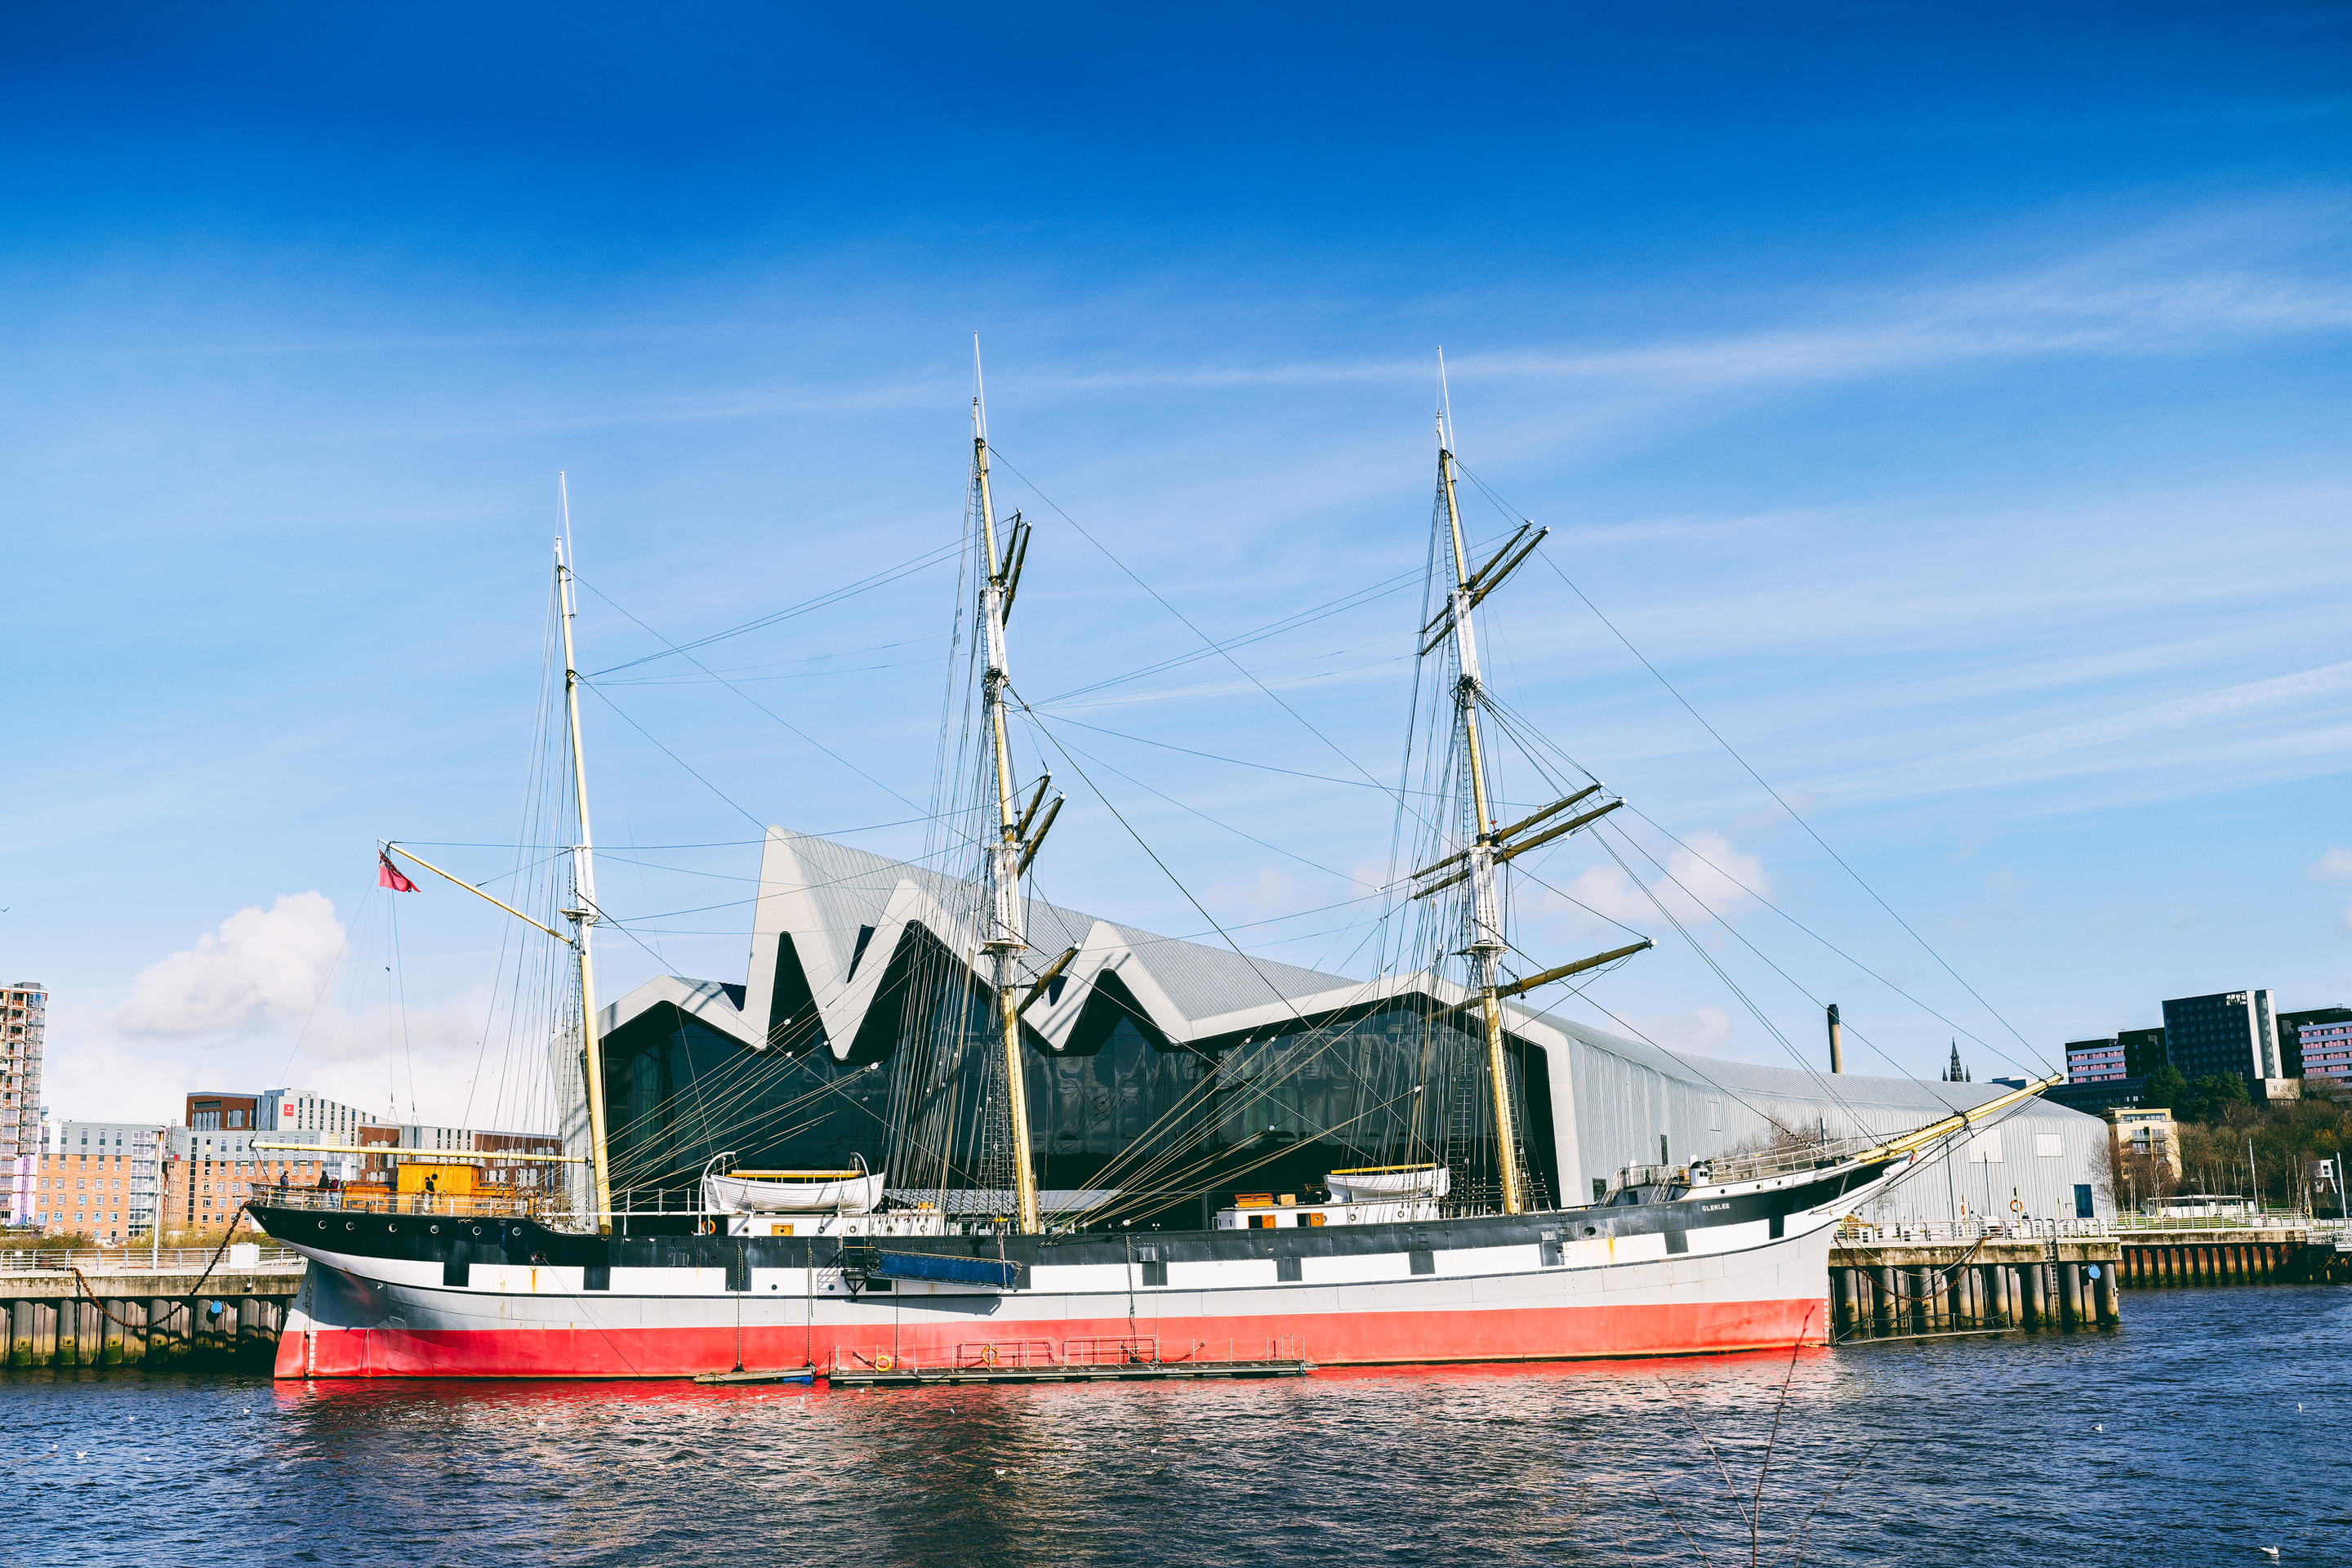 Riverside Museum And Tall Ship Overview